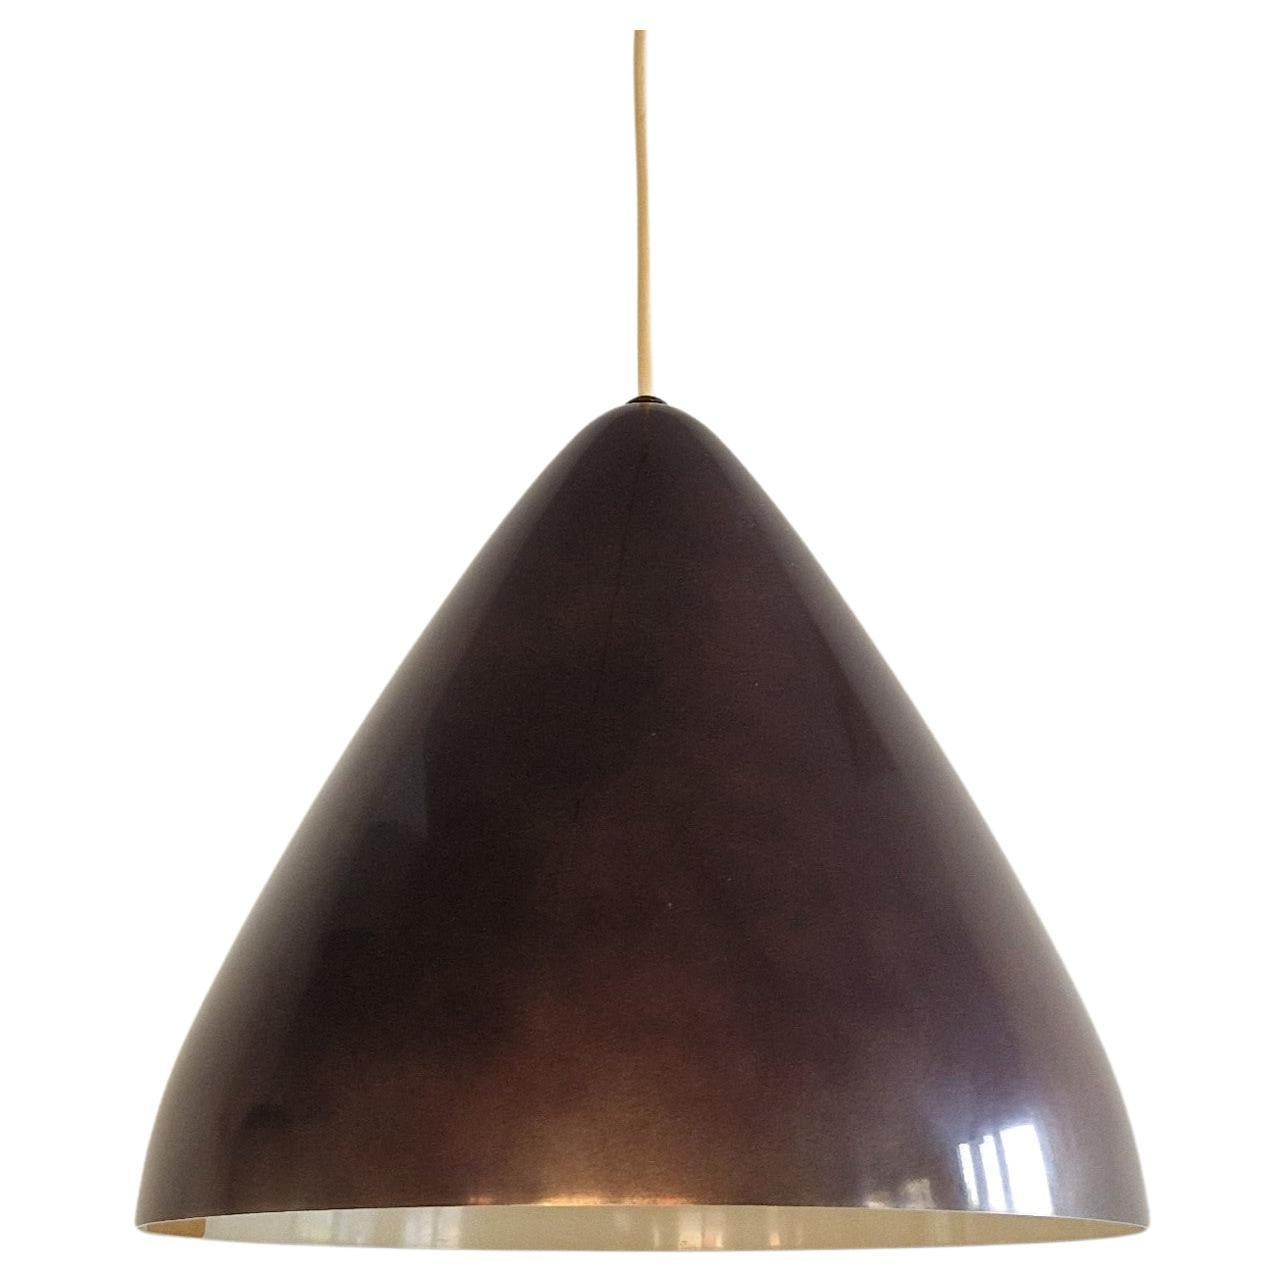 Dark wine red conical pendant lamp by Lisa Johansson-Pape for Orno, Finland 1960